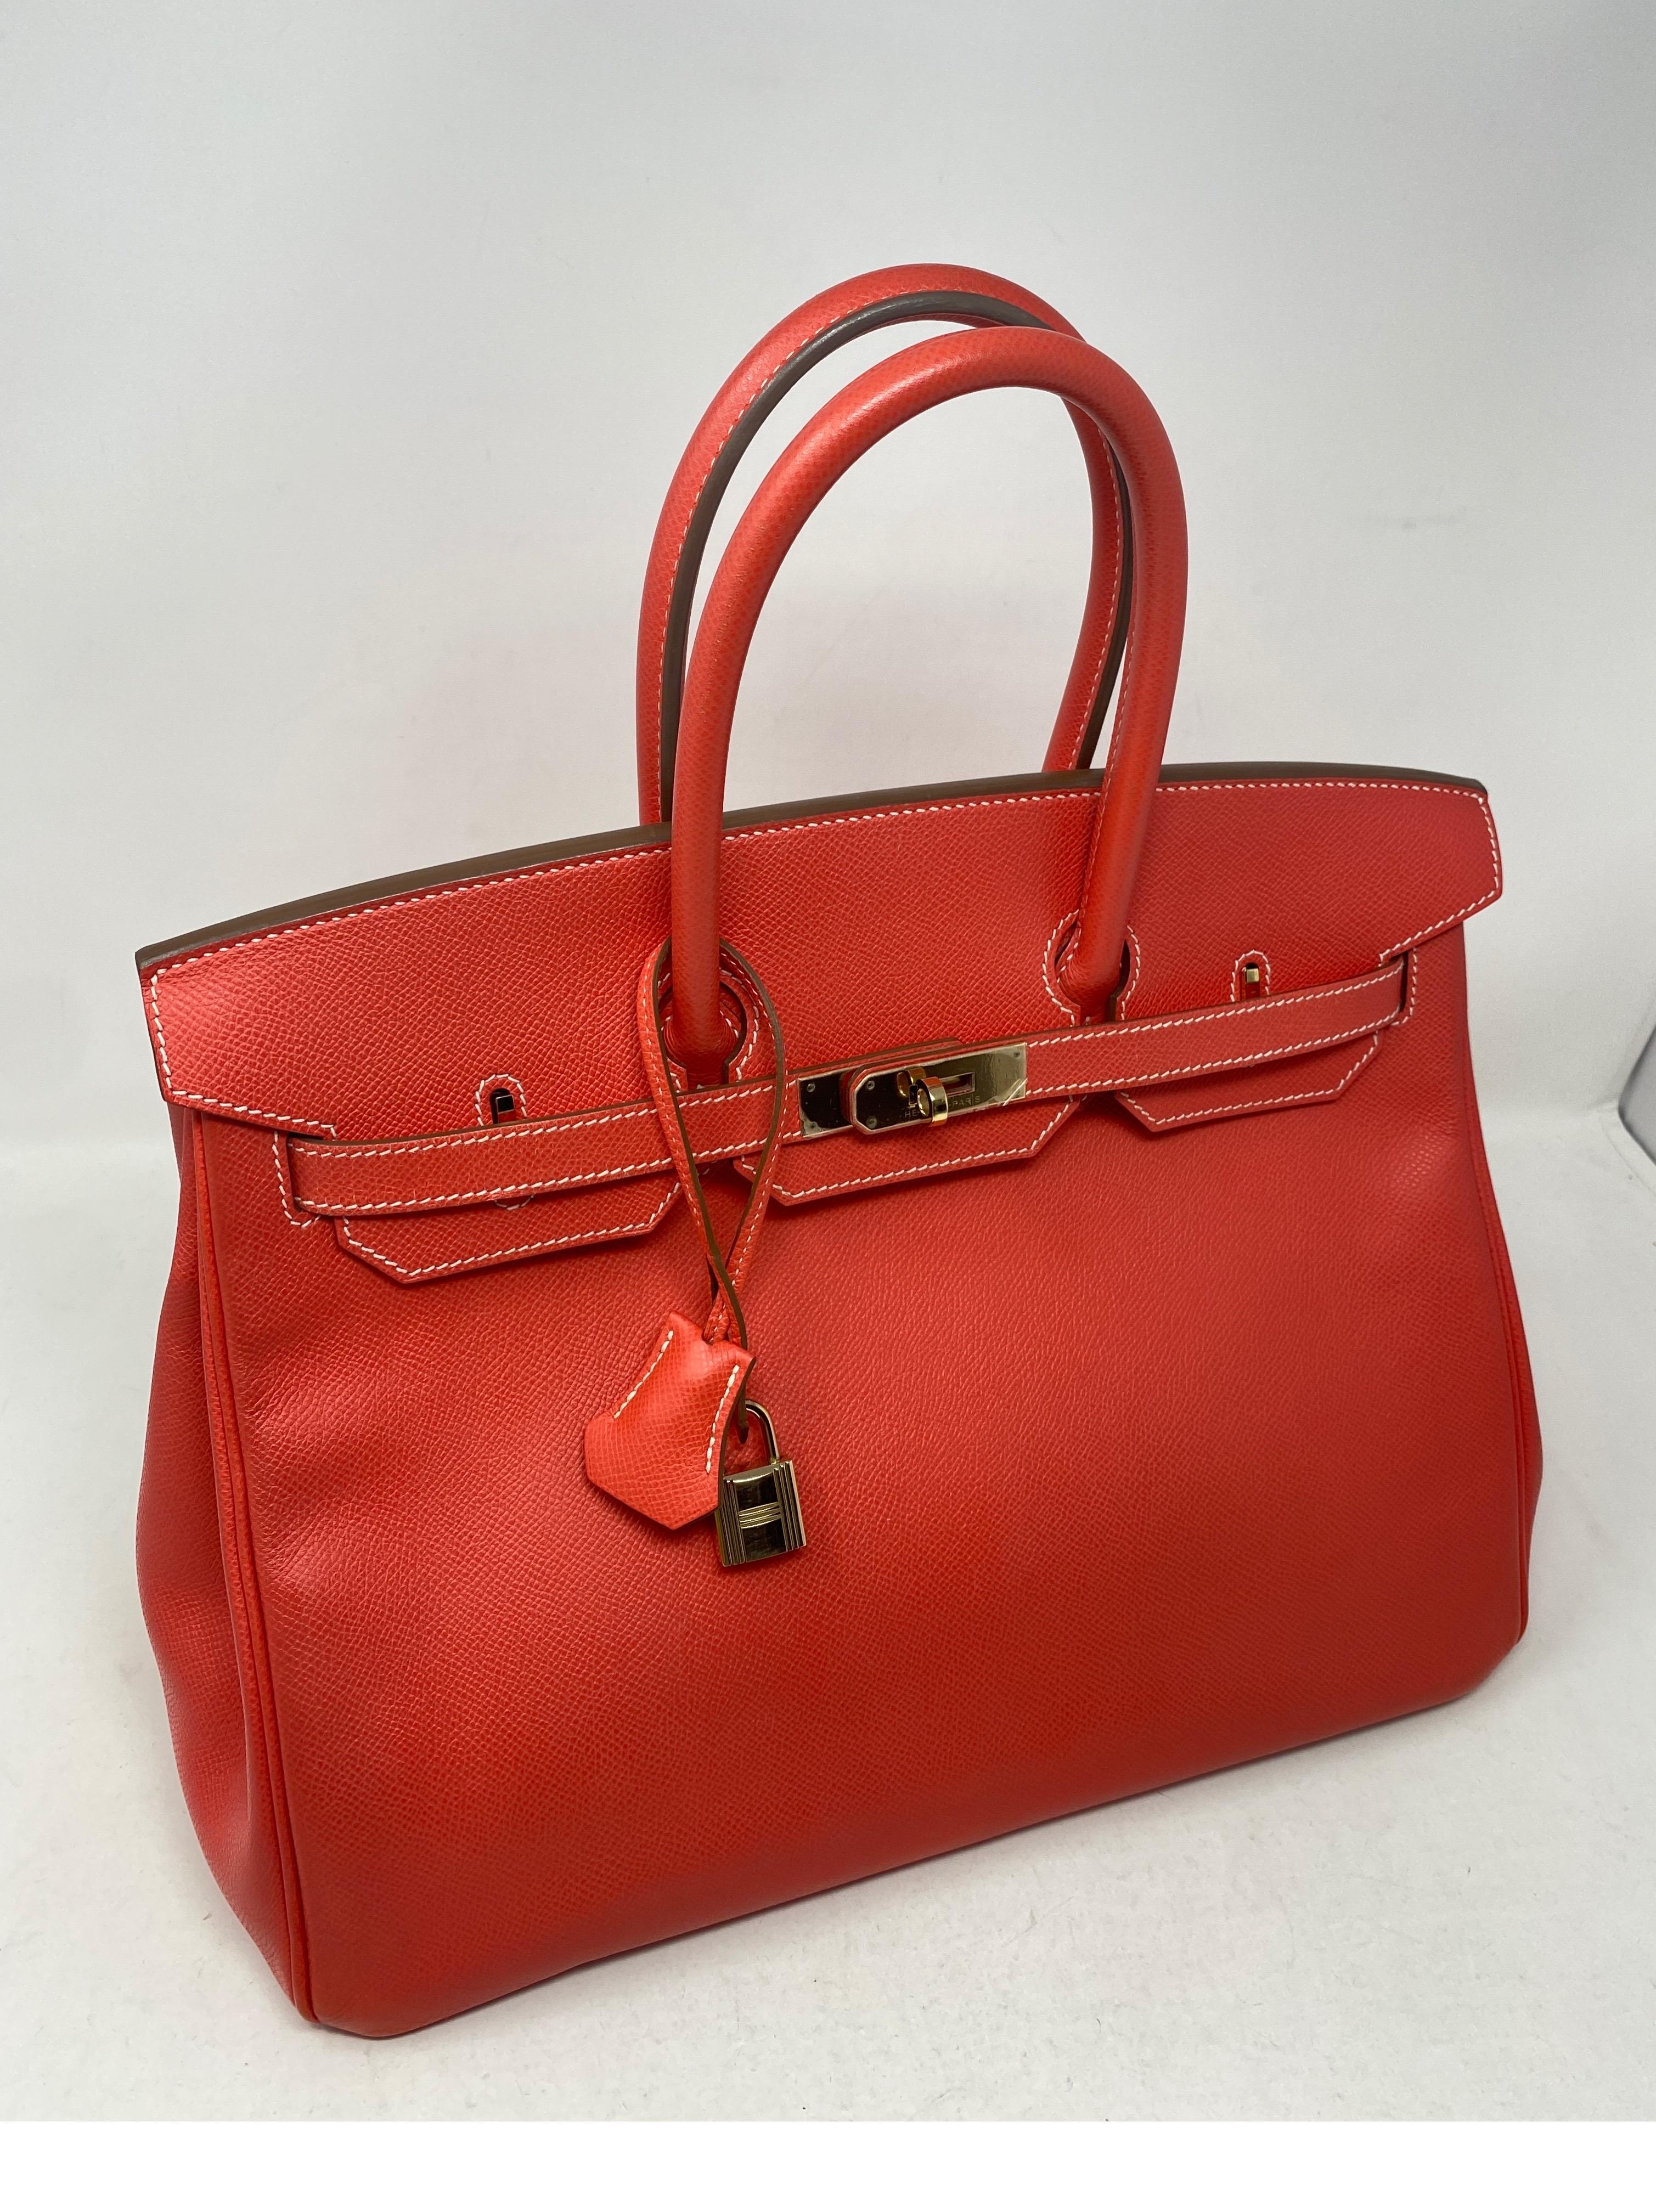 Hermes Rose Jaipur Candy Birkin 35 Bag. Epsom leather. Gold hardware. Excellent condition. Plastic still on hardware. Inside color is gold tan. Rare and limited combo. Includes clochette, lock, keys, and dust cover. Guaranteed authentic. 